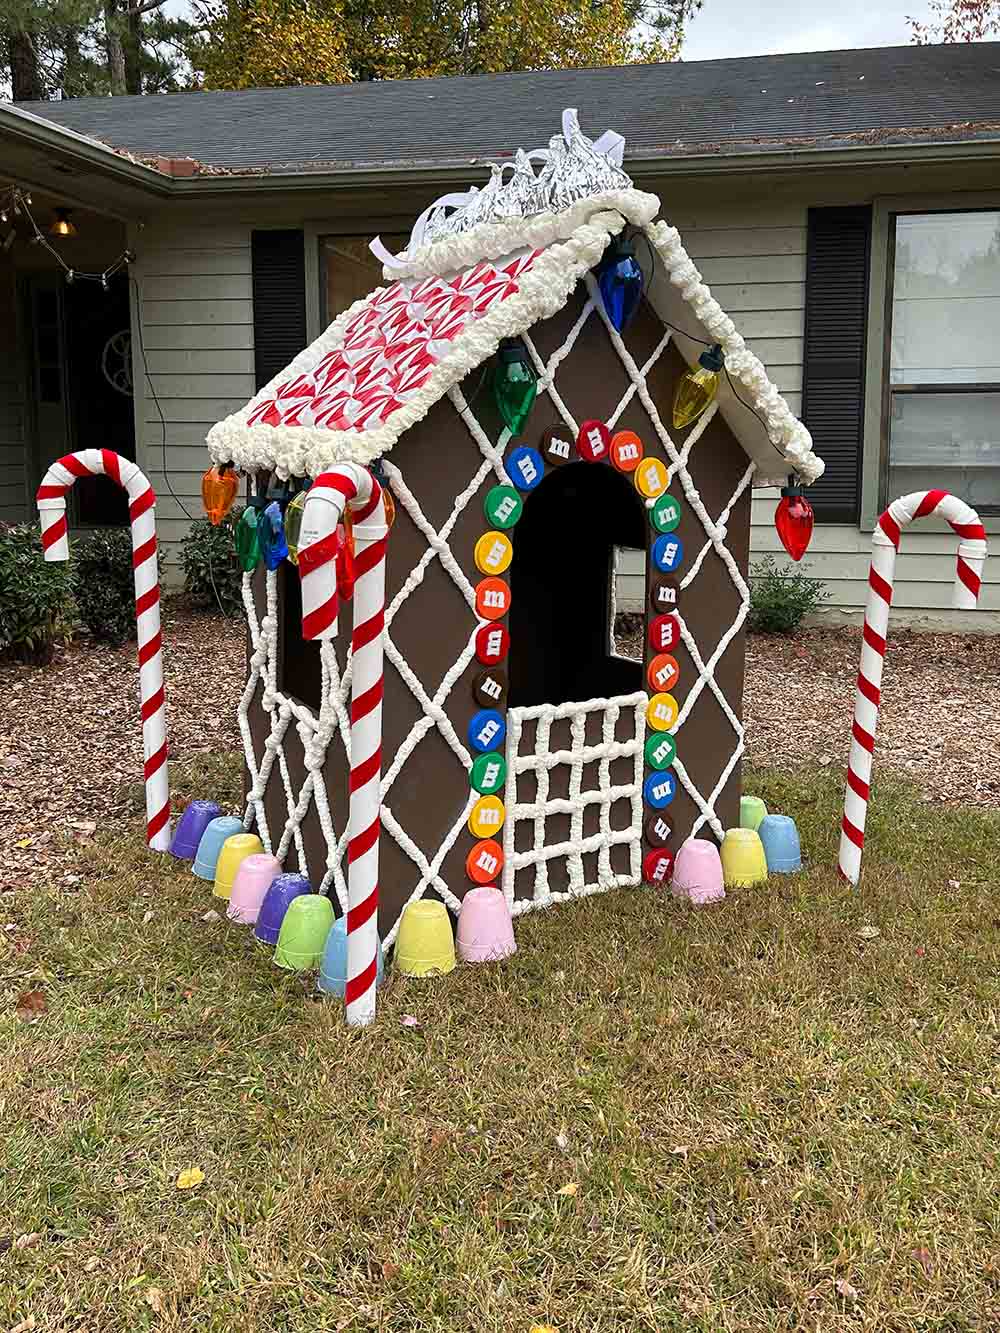 How to Build a Gingerbread Playhouse - The Home Depot